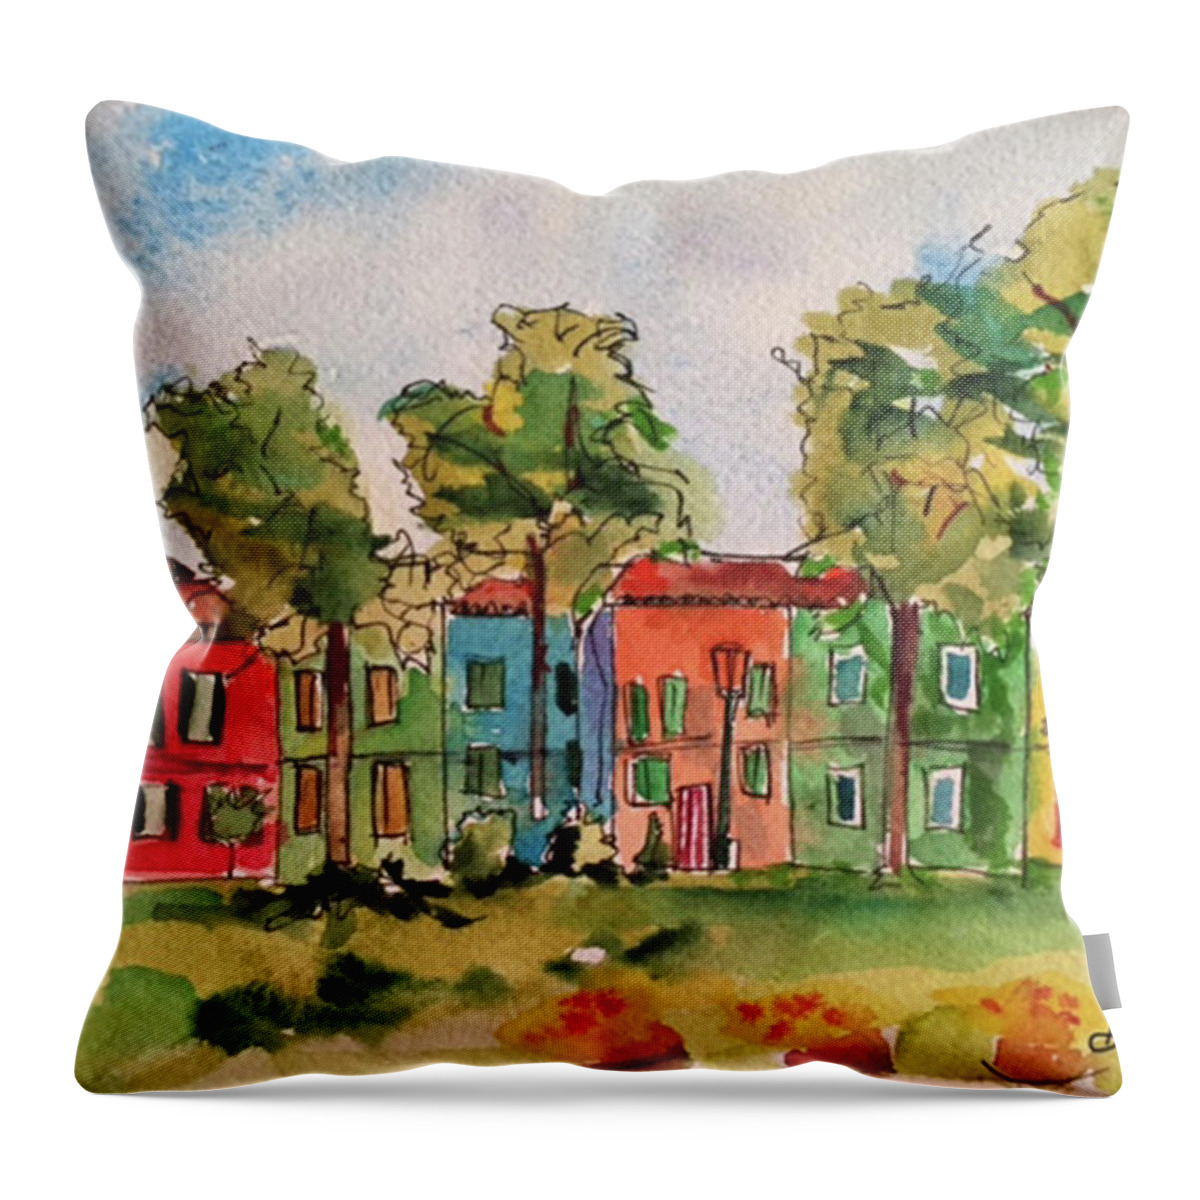 Sketch Throw Pillow featuring the painting Venice Charms by Bonny Butler